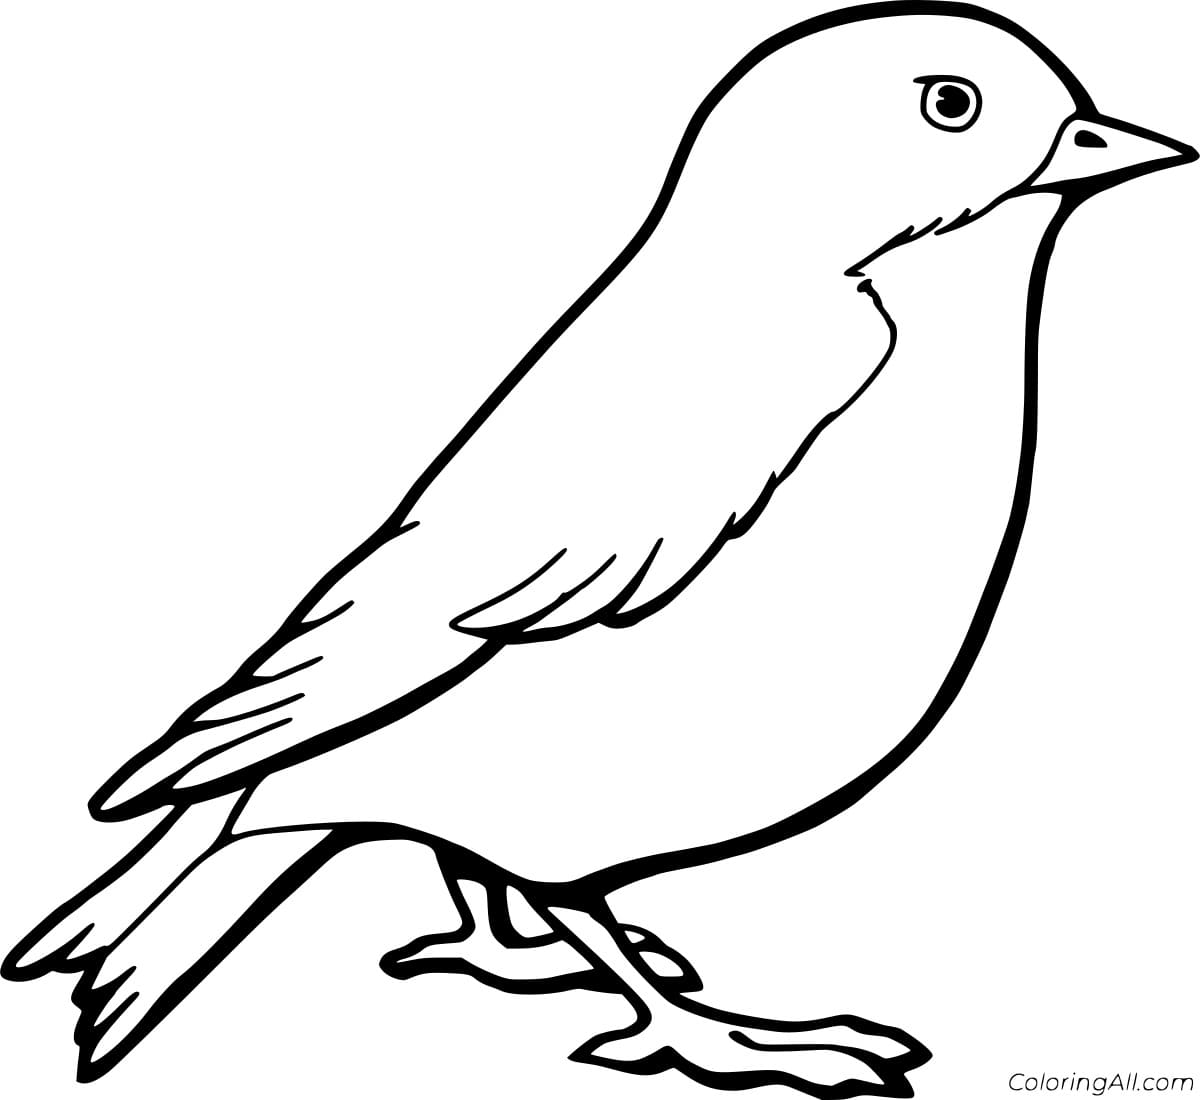 American Robin Image For Kids Coloring Page